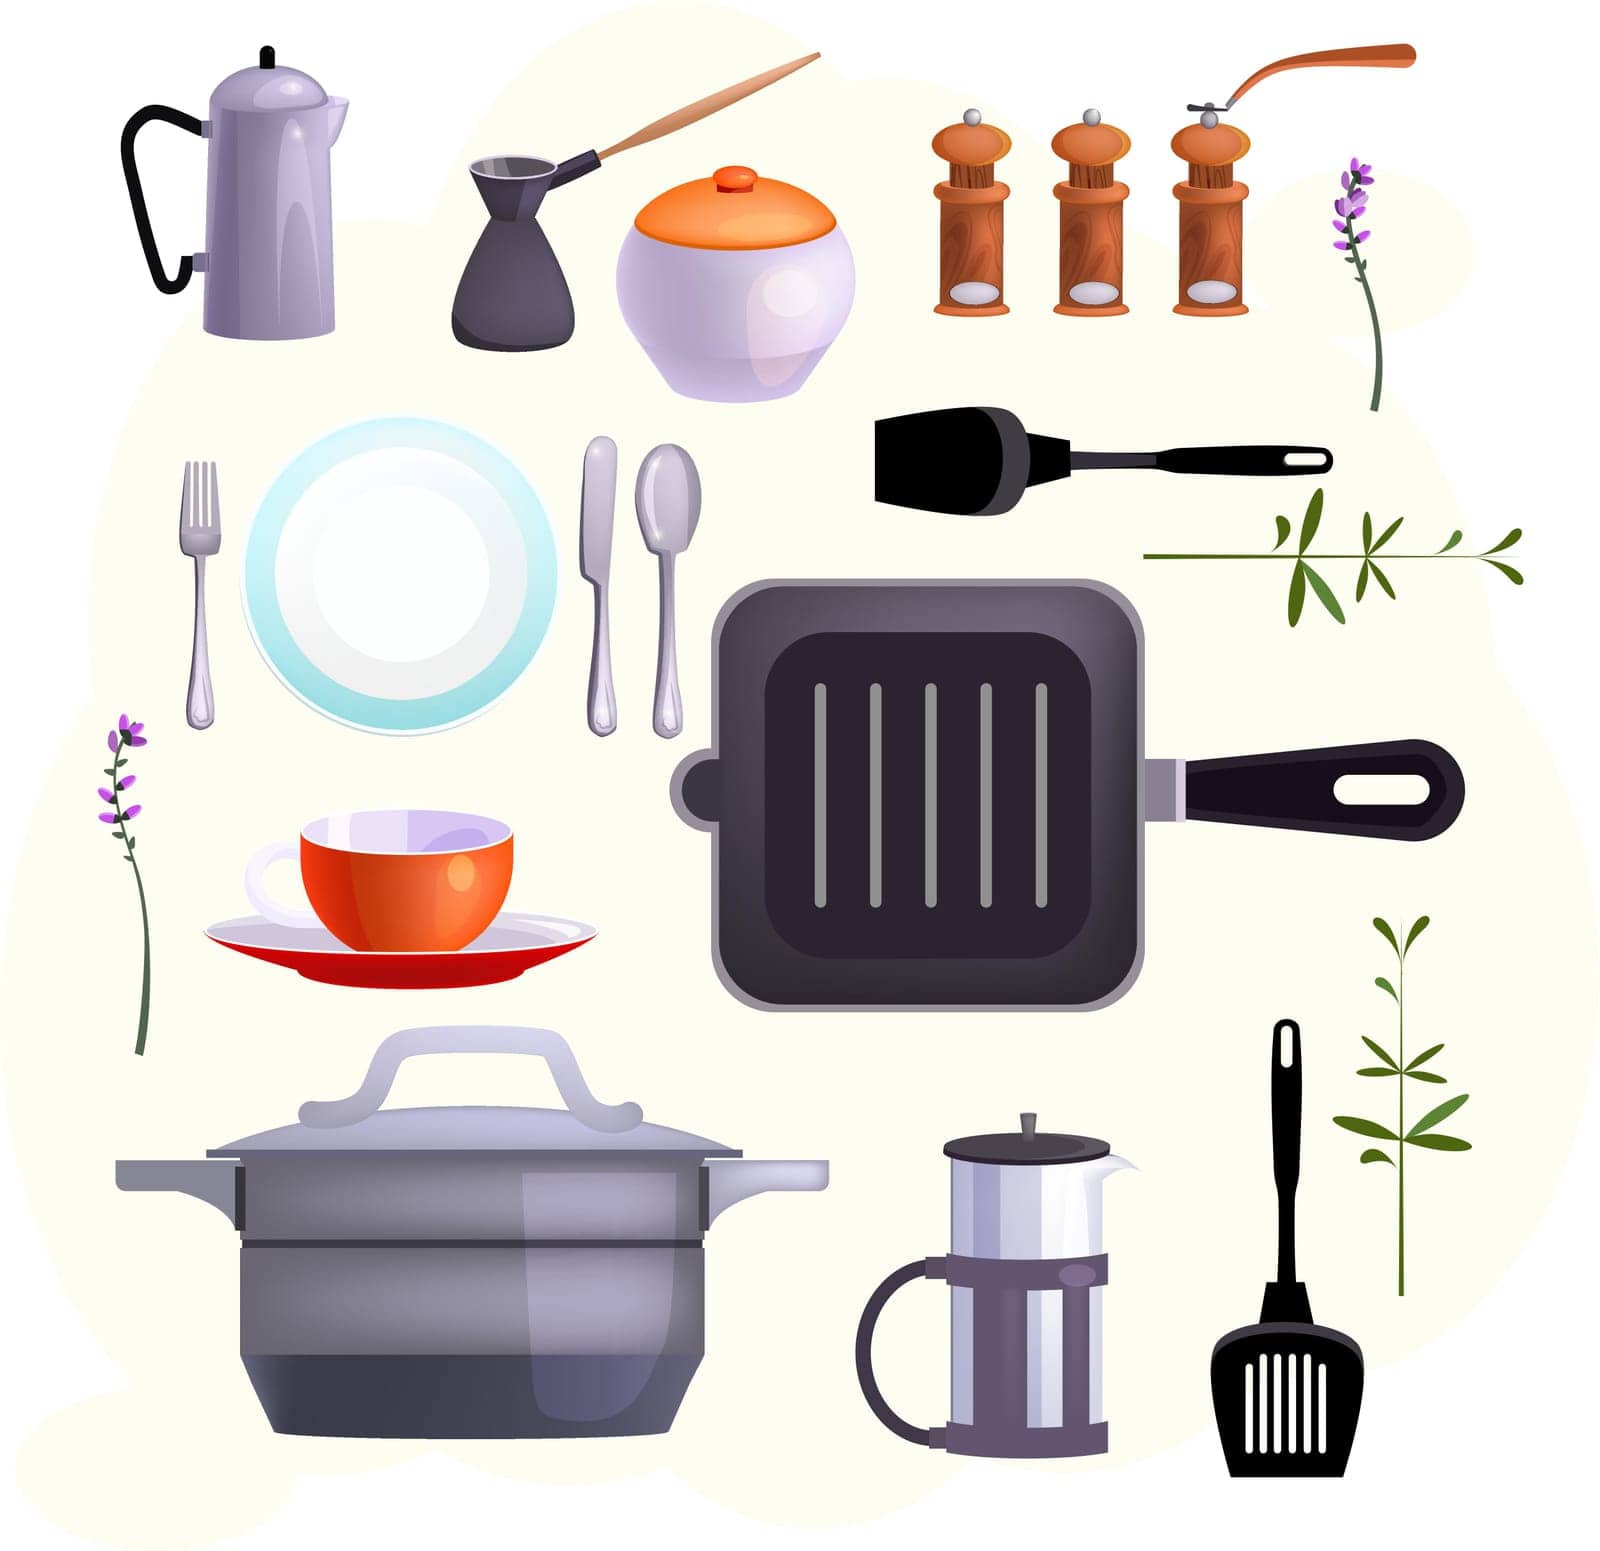 Kitchen equipment icons. Set of line icons. Cutlery, cup, French press. Cooking concept. Illustrations can be used for topics like kitchen, cooking, eating